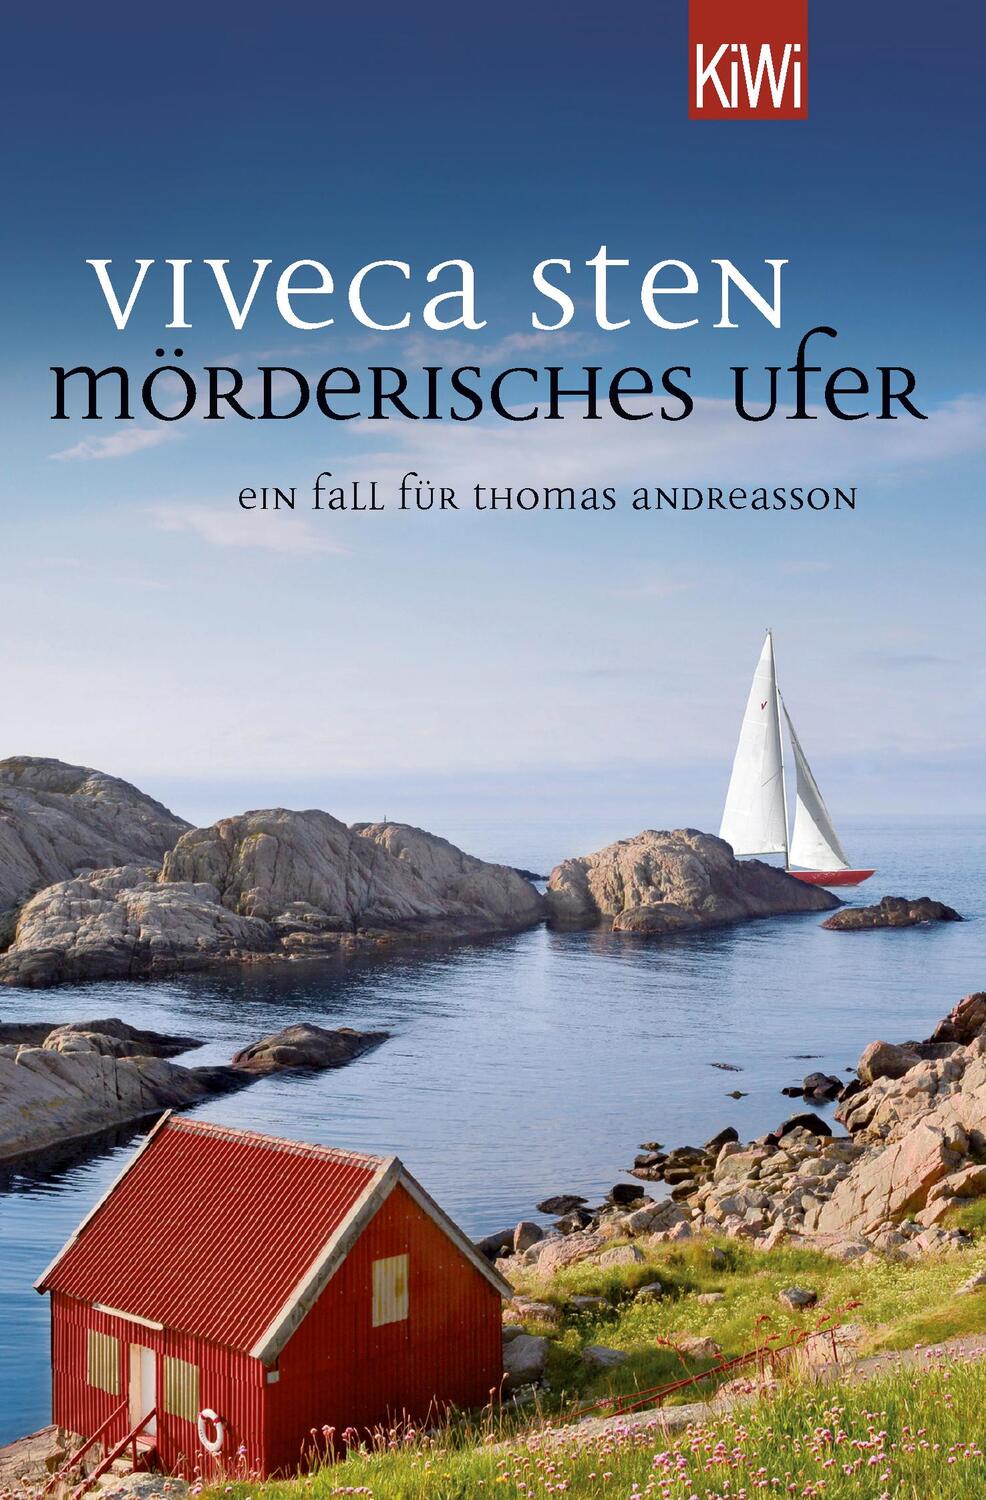 Cover: 9783462051902 | Mörderisches Ufer | Thomas Andreassons achter Fall | Viveca Sten